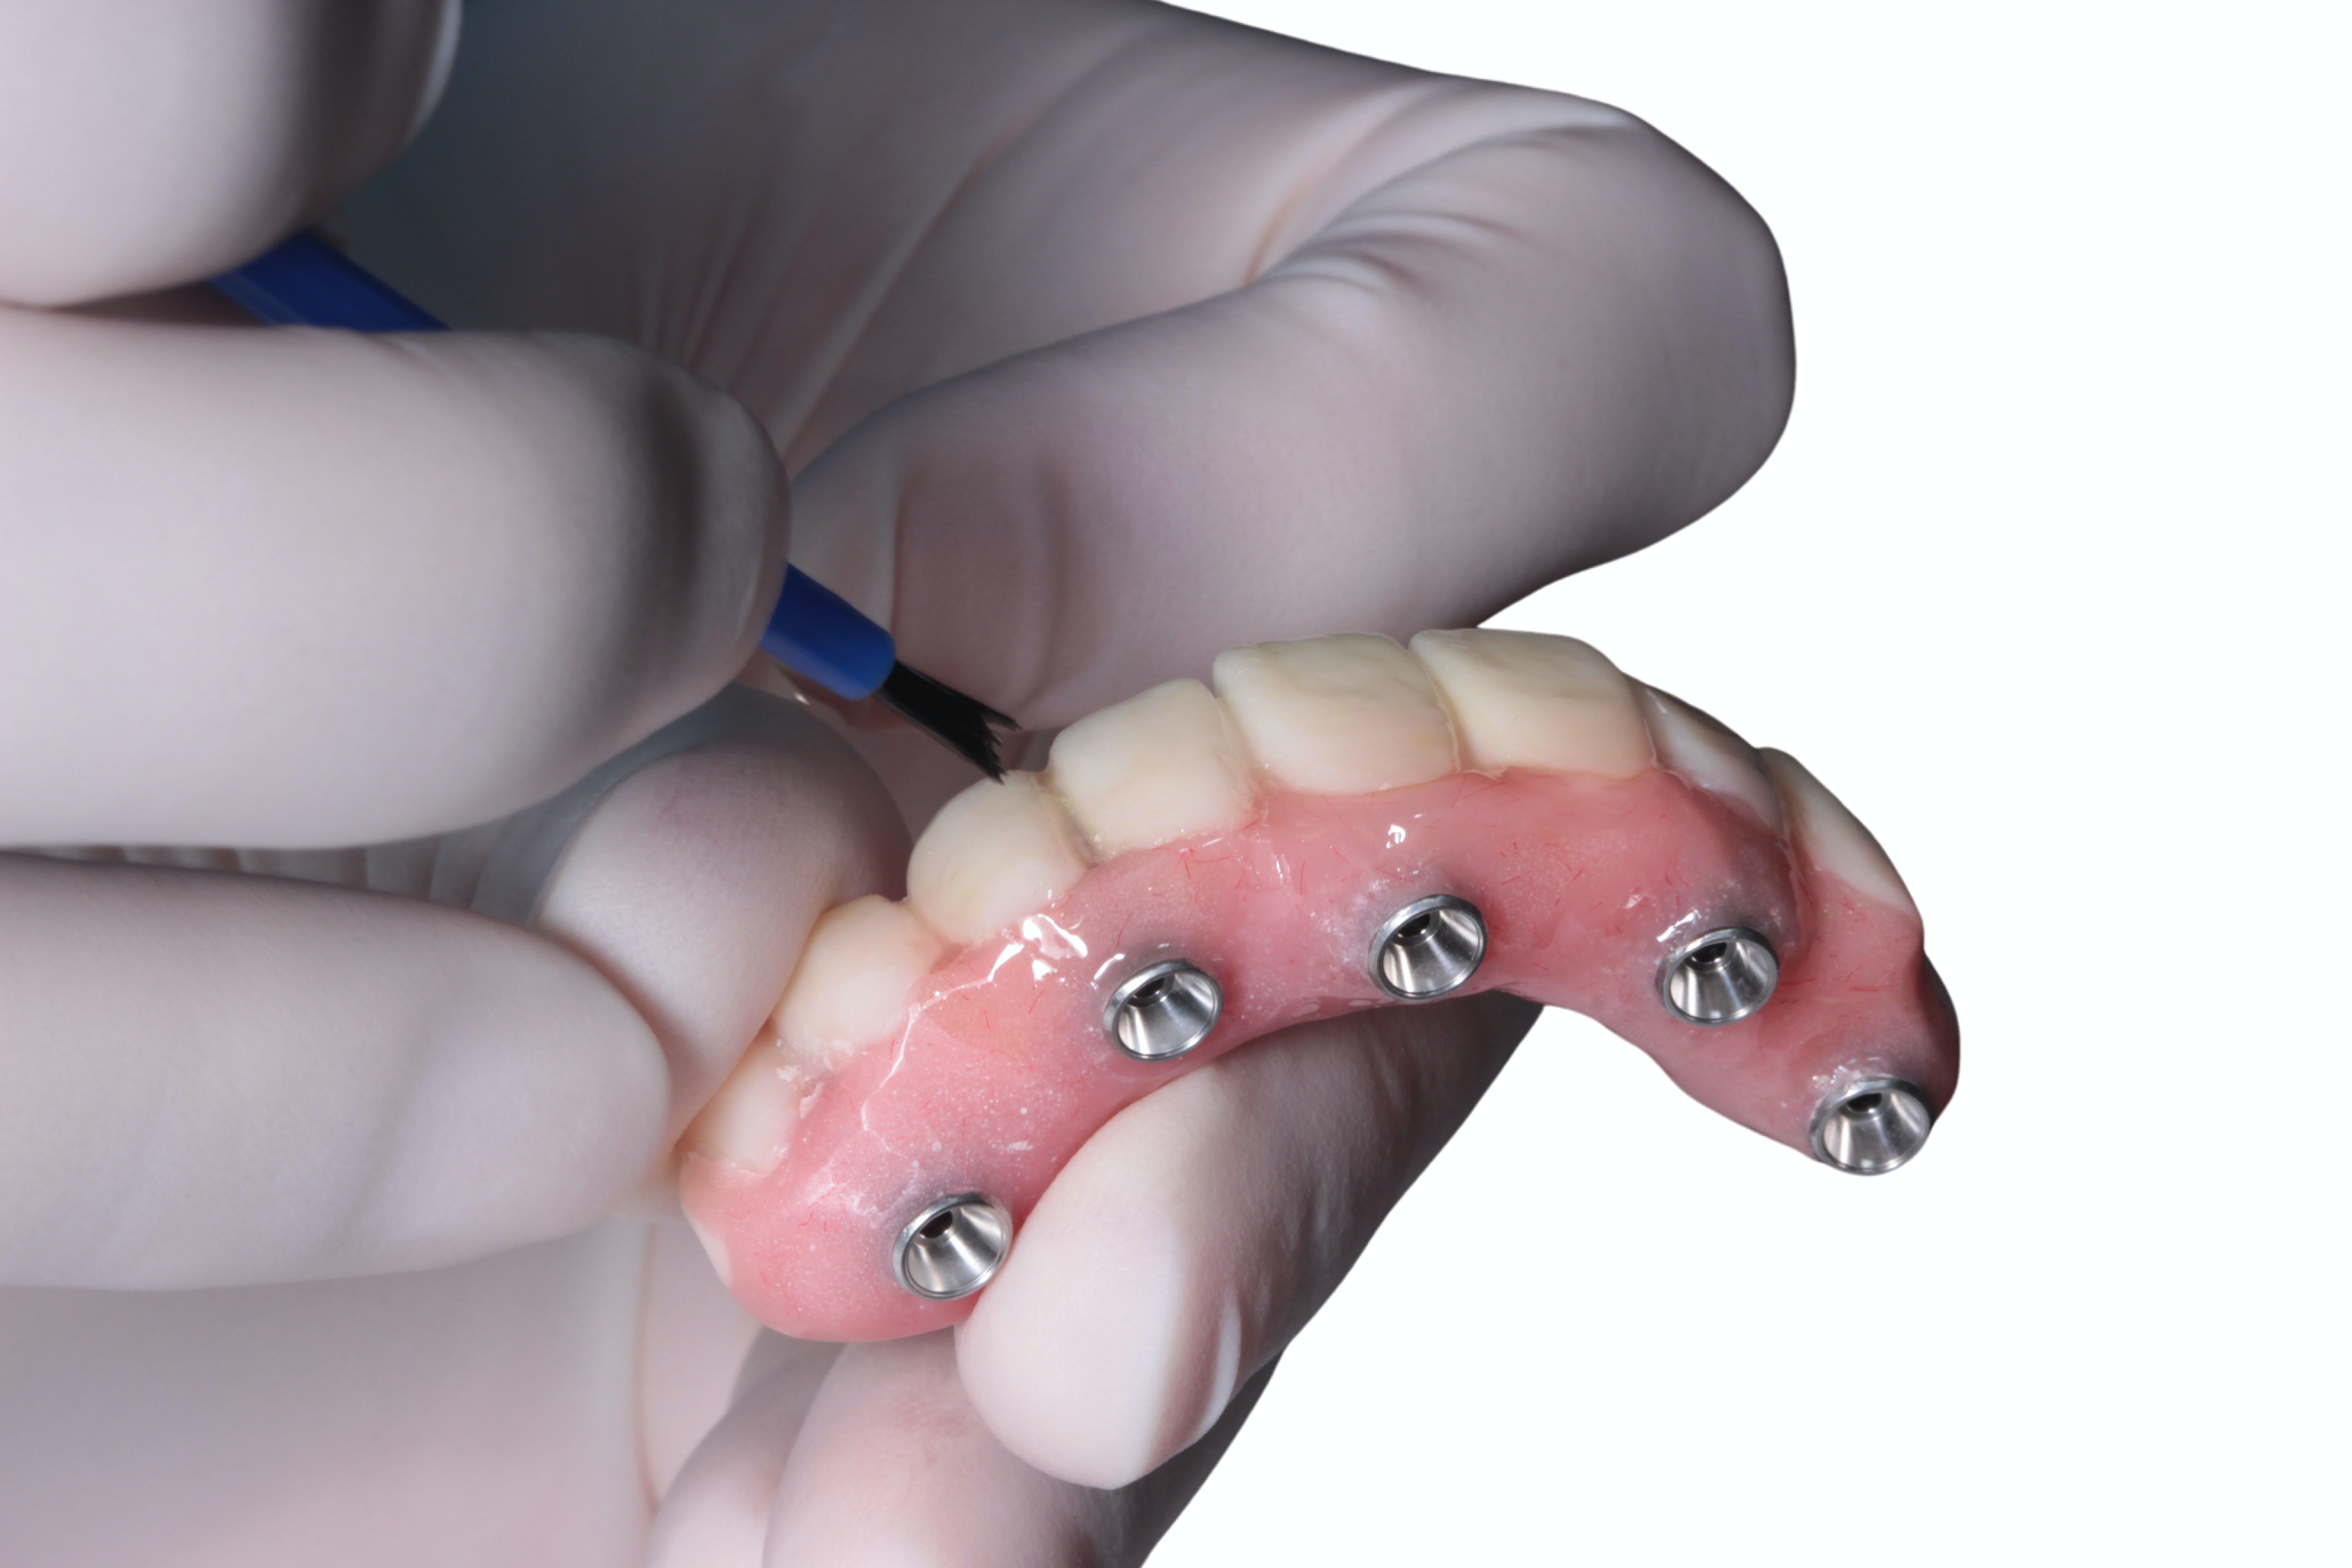 Zirconia All-on-X - Why it's the Best Option